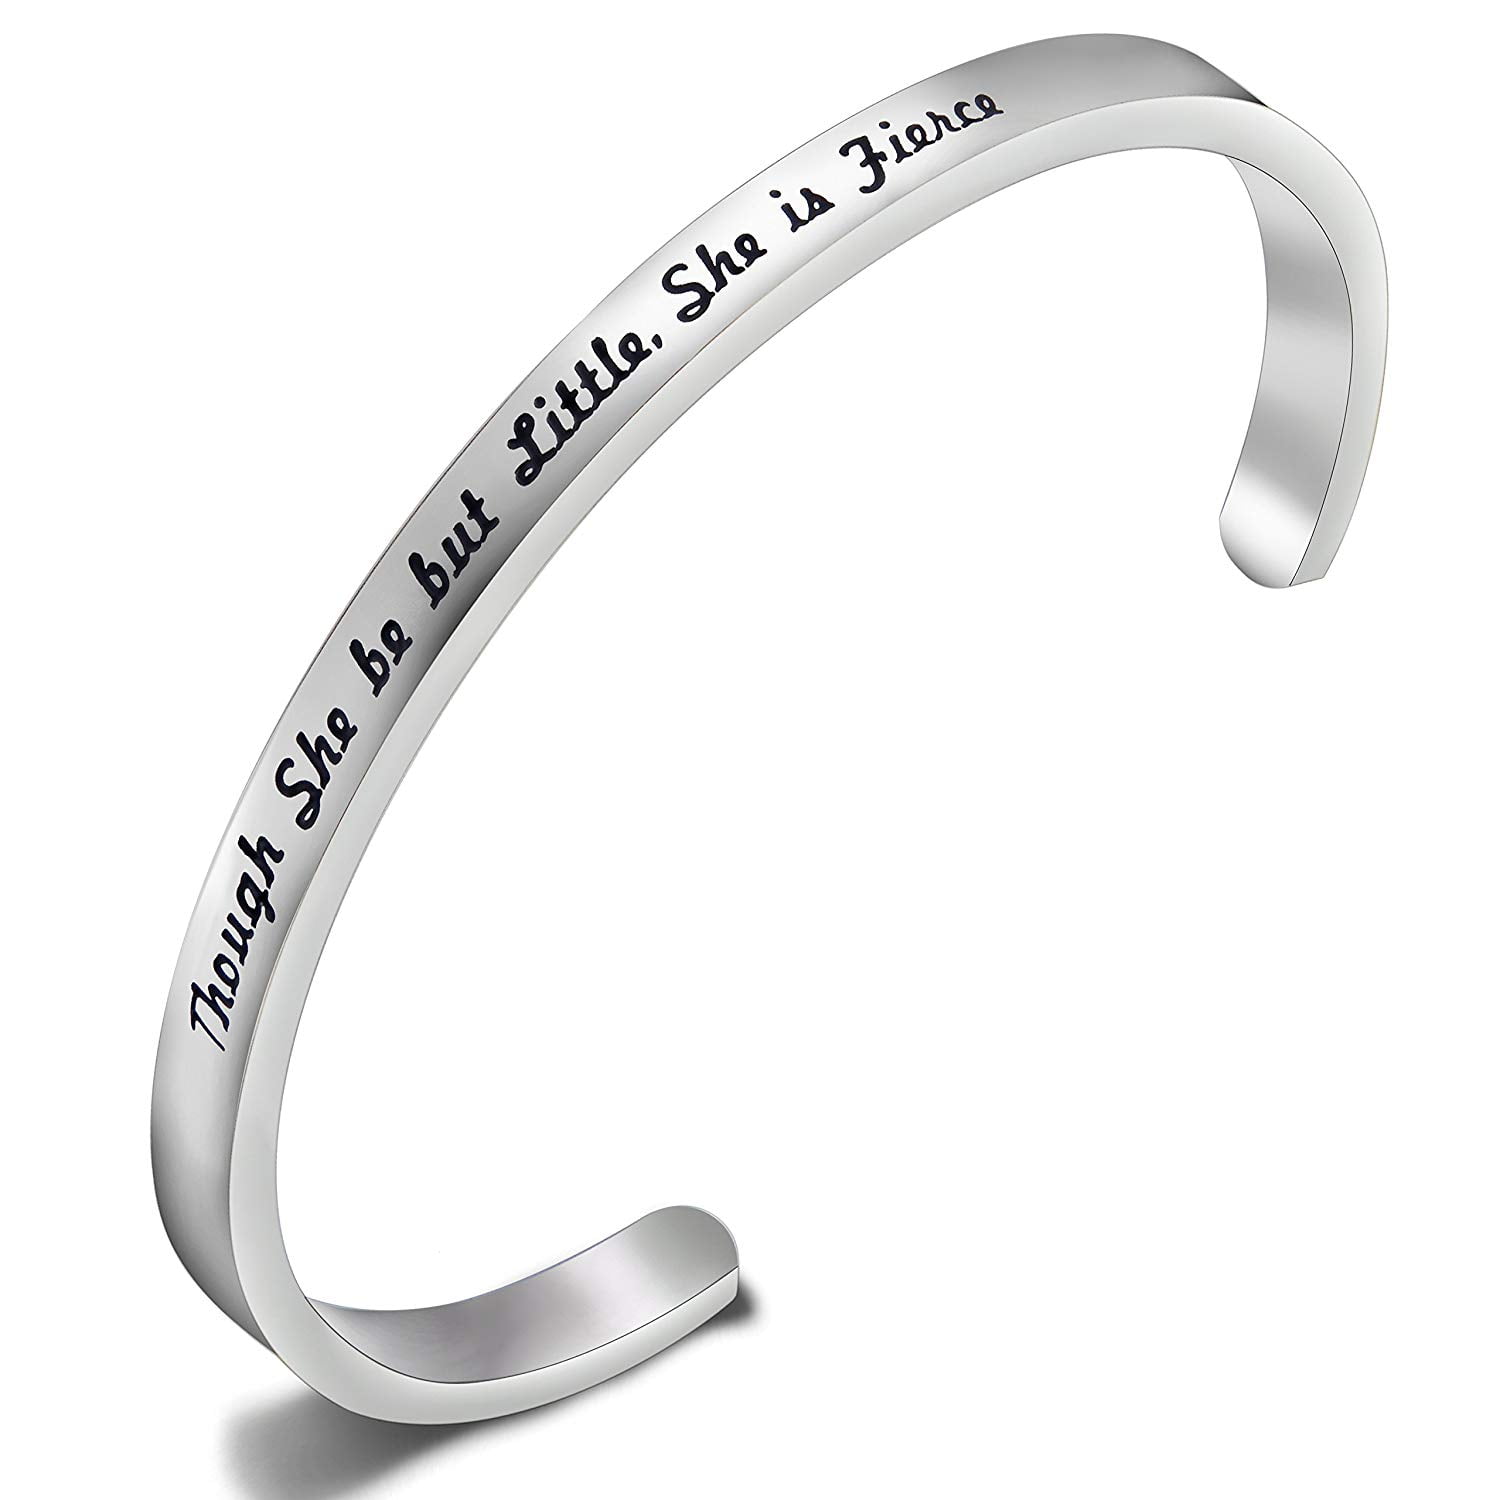 Bangle Silver Stainless Steel 4 Mm Engraved Positive Inspirational Quote  Handmade Cuff Mantra Bracelets For Women Gifts From Sodatx 417   DHgateCom